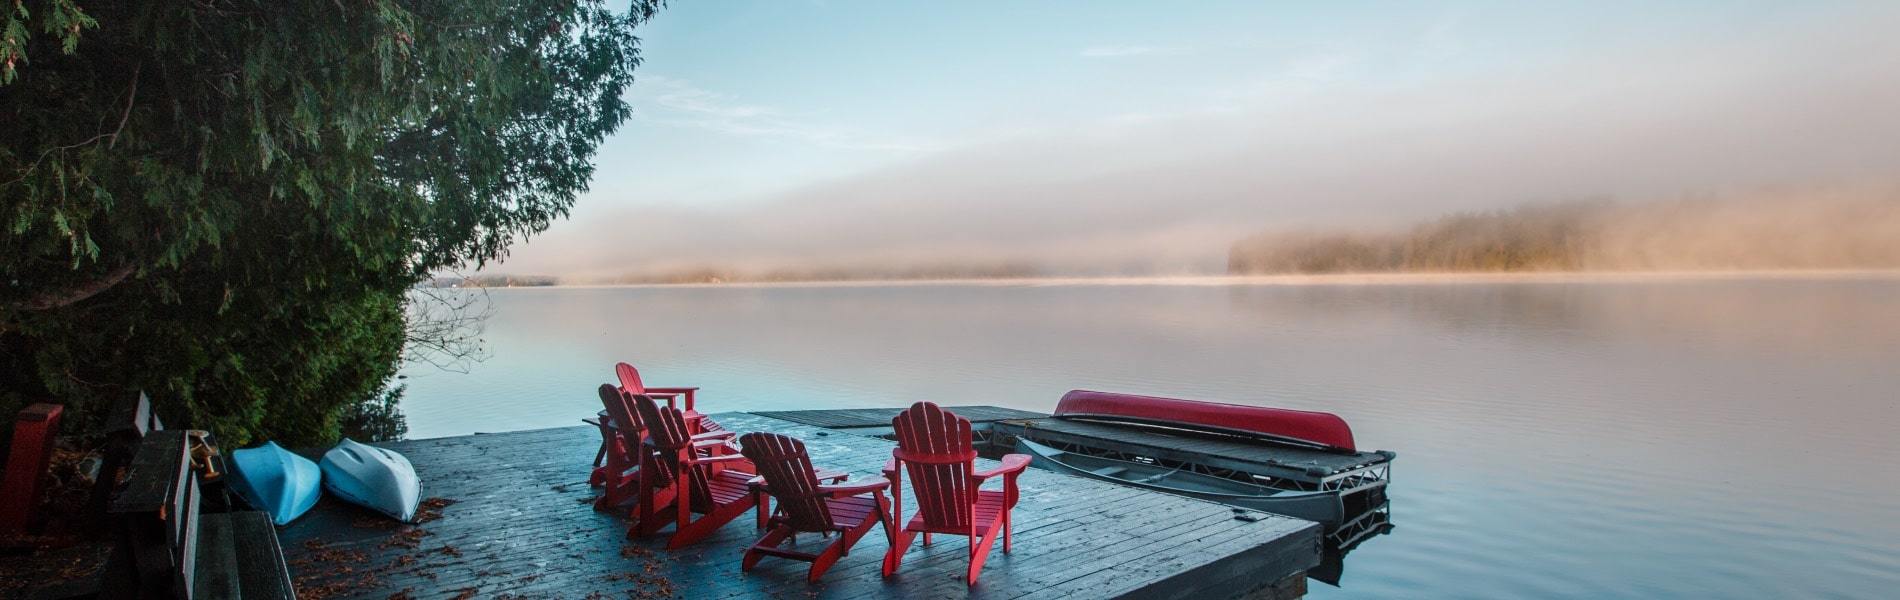 Chairs on a dock overlooking the water in Clement Lake, Ontario